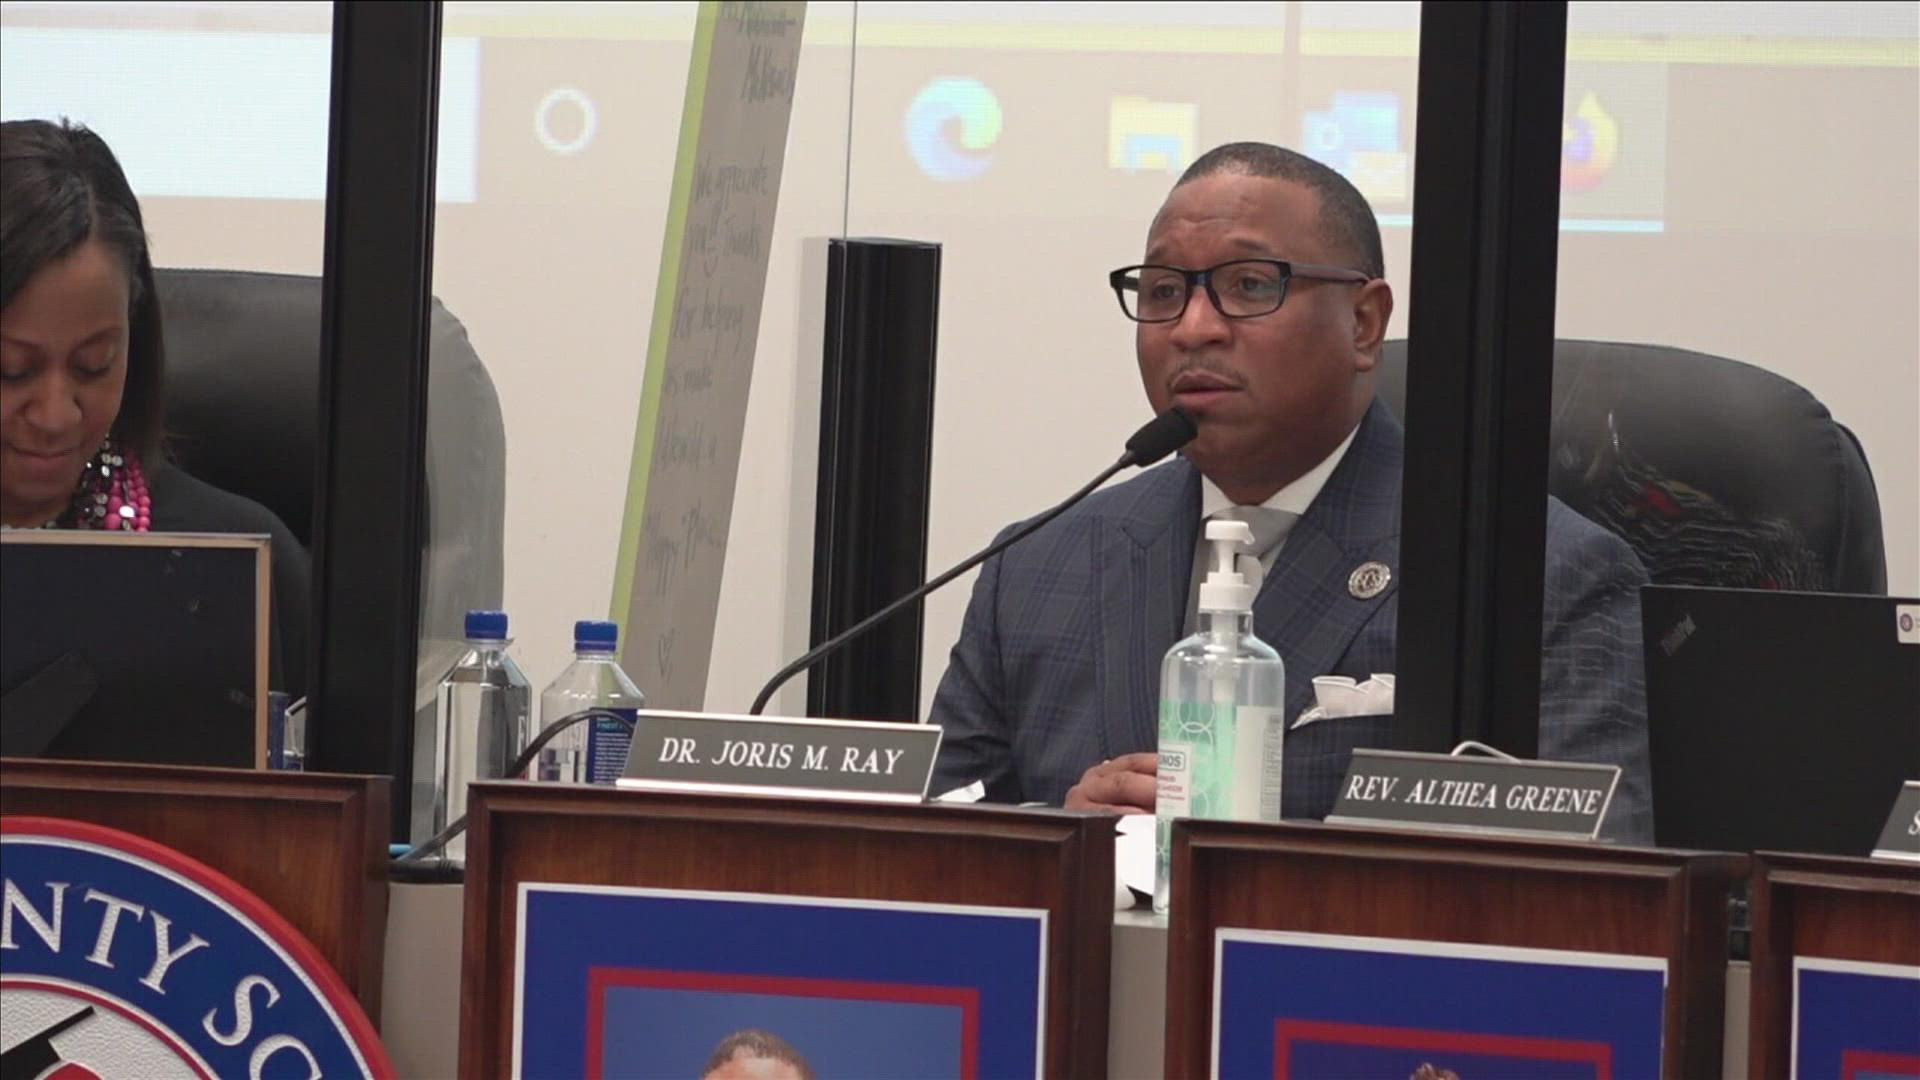 Otis Sanford explains why he thinks an independent investigation into MSCS Superintendent Joris Ray's private life is the right call.